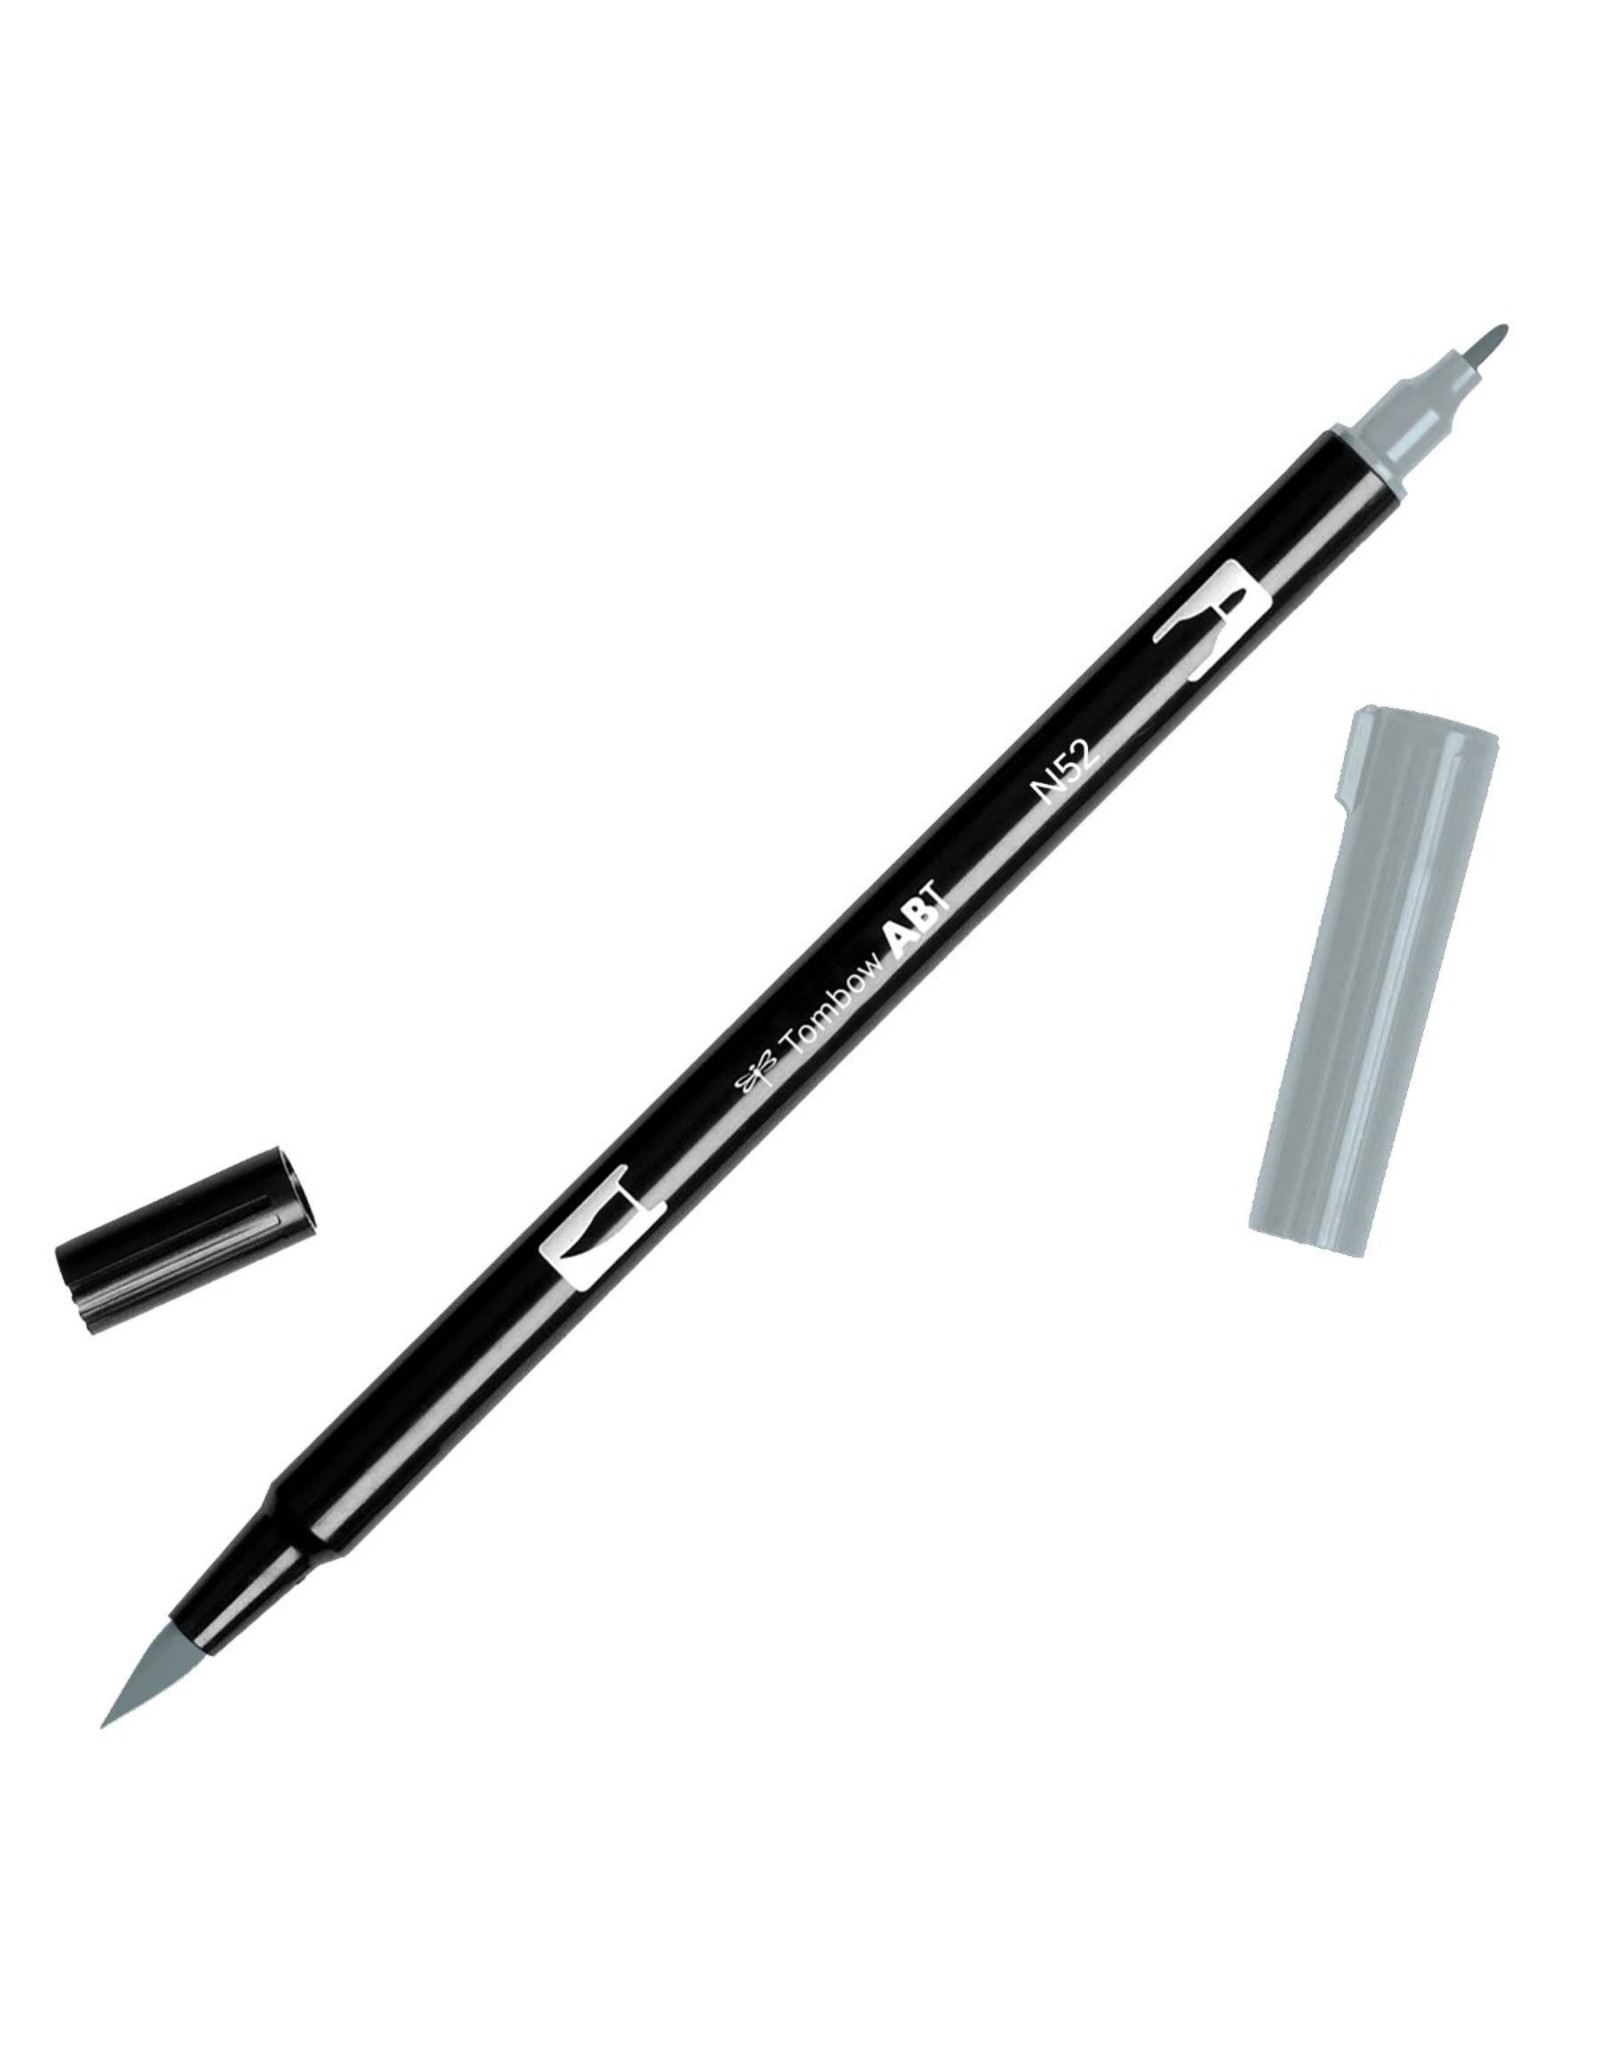 TOMBOW TOMBOW ABT-N52 COOL GRAY 8 DUAL BRUSH MARKER